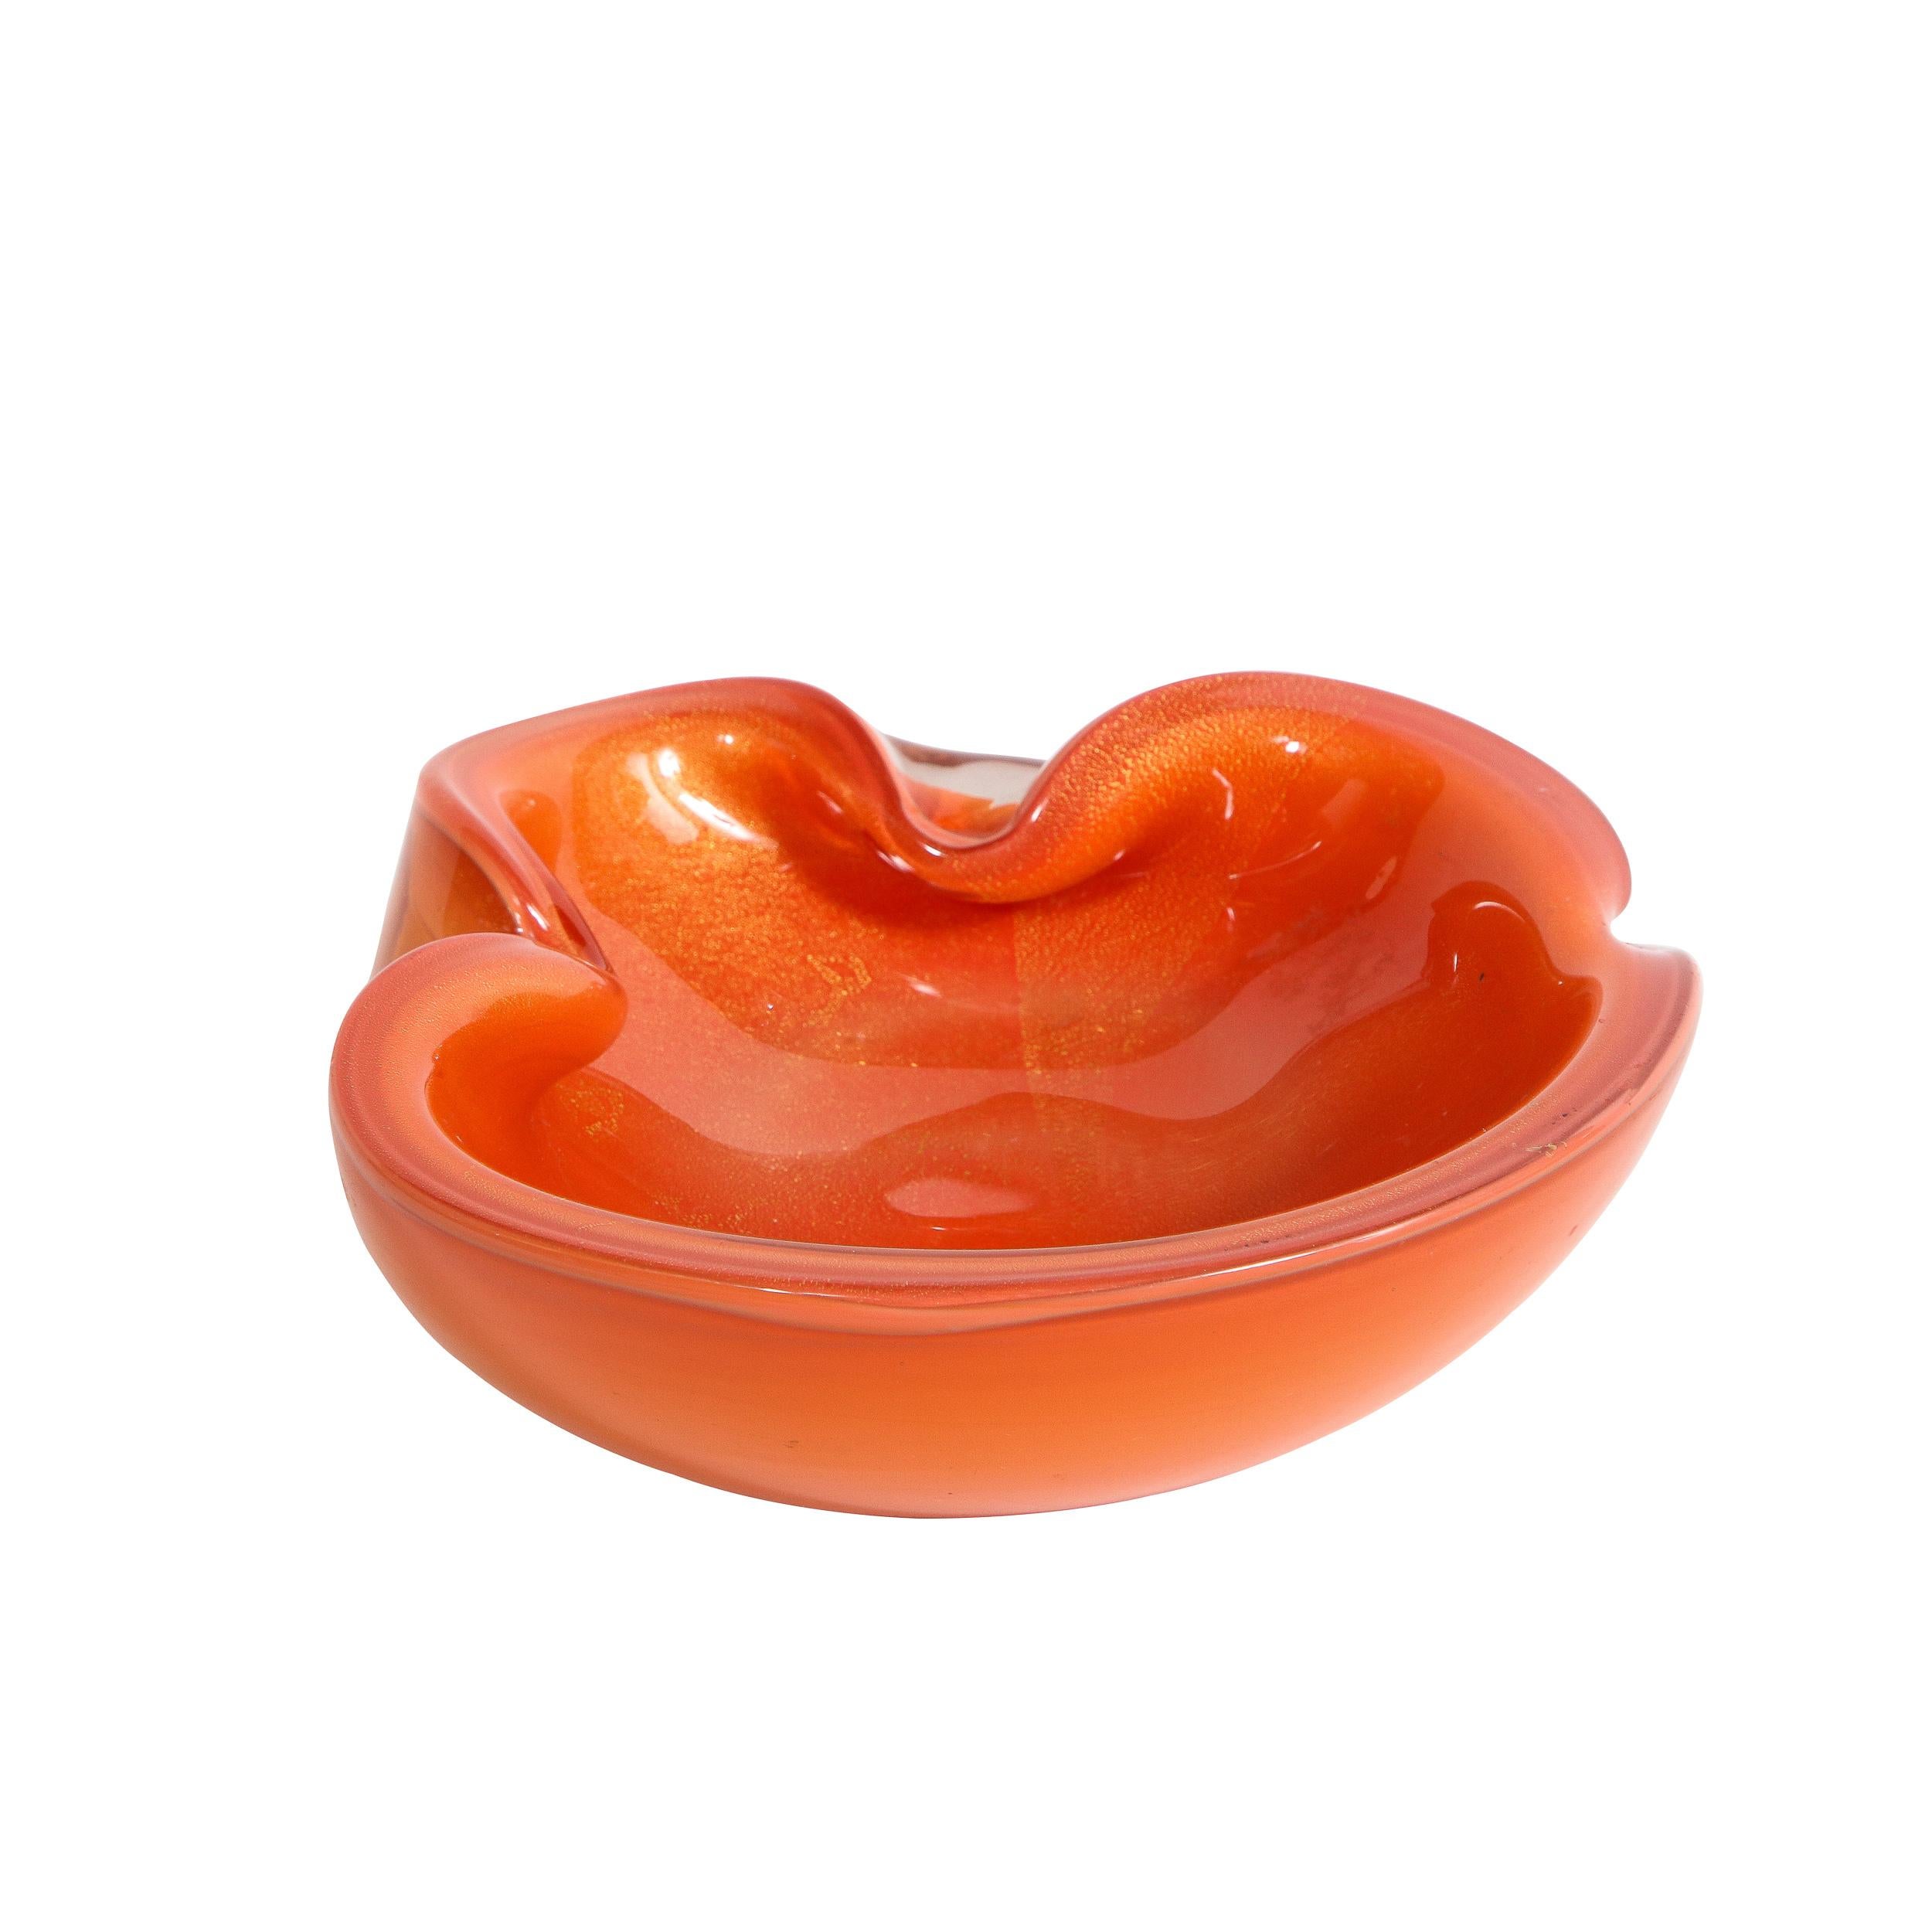 Mid-20th Century Mid-Century Modern Hand Blown Murano Glass Bowl in Persimmon Hue with 24kt Gold